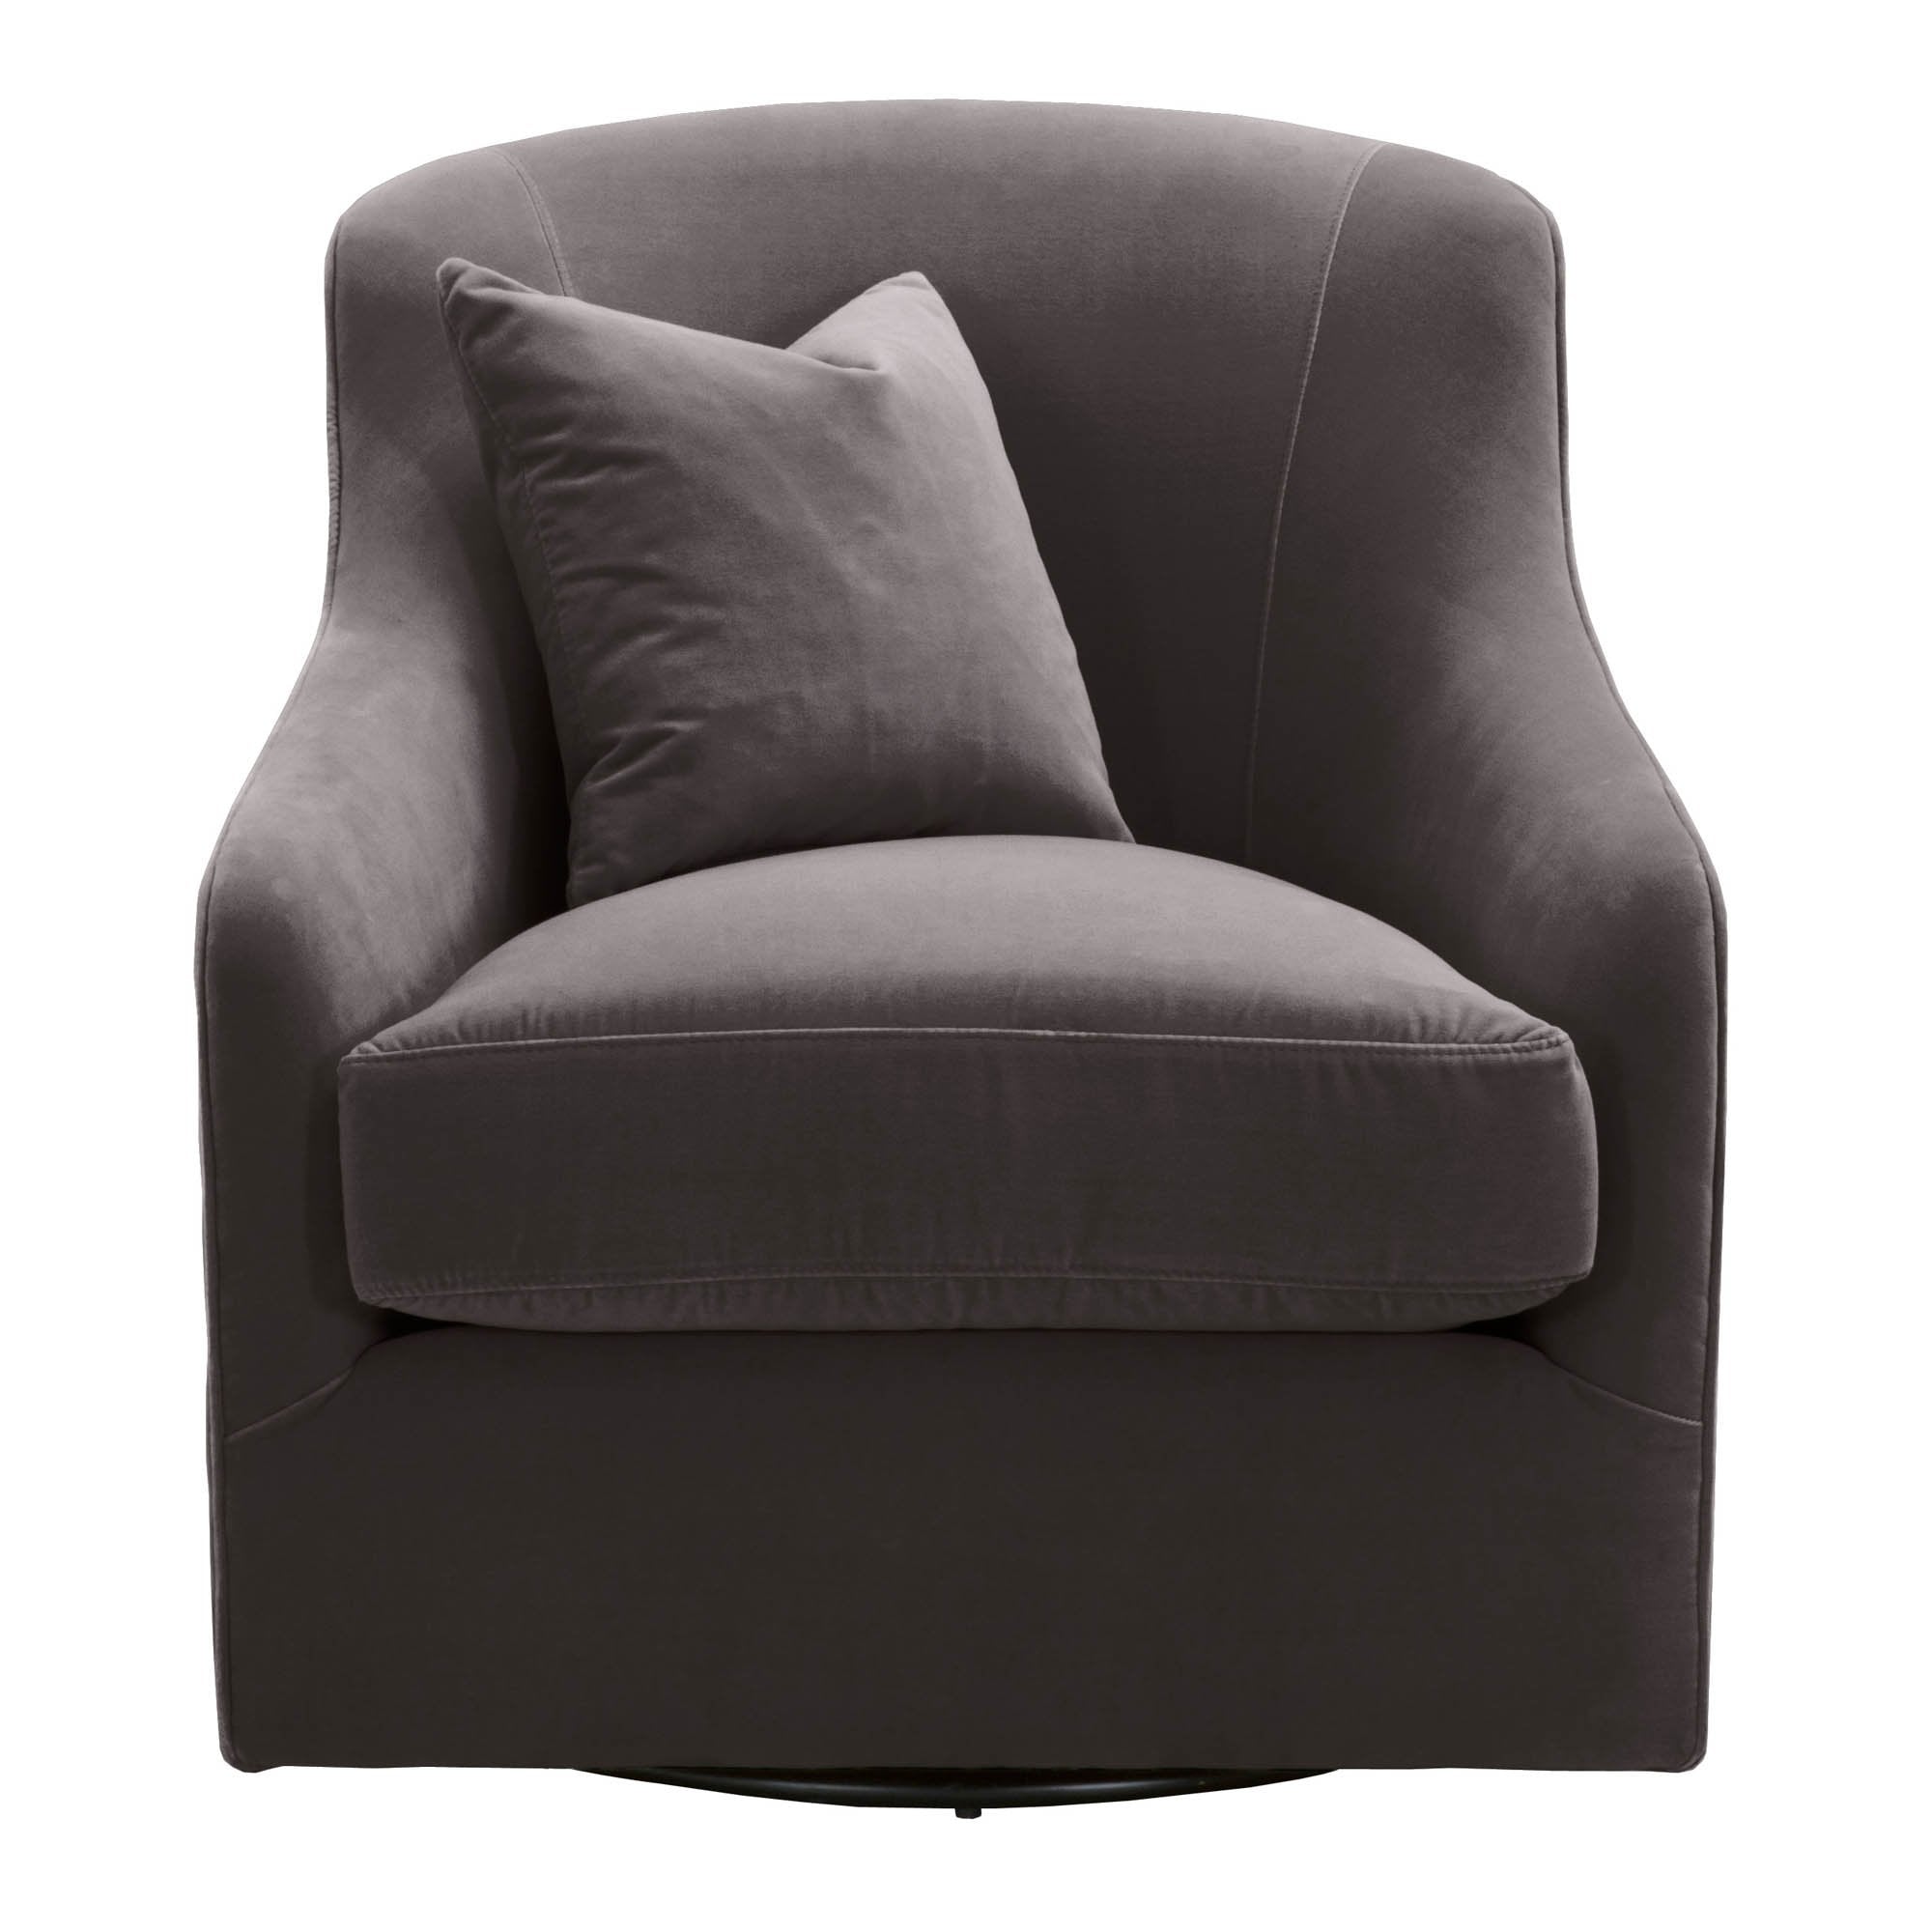 Mona Swivel Club Chair in 10.9% Polyester